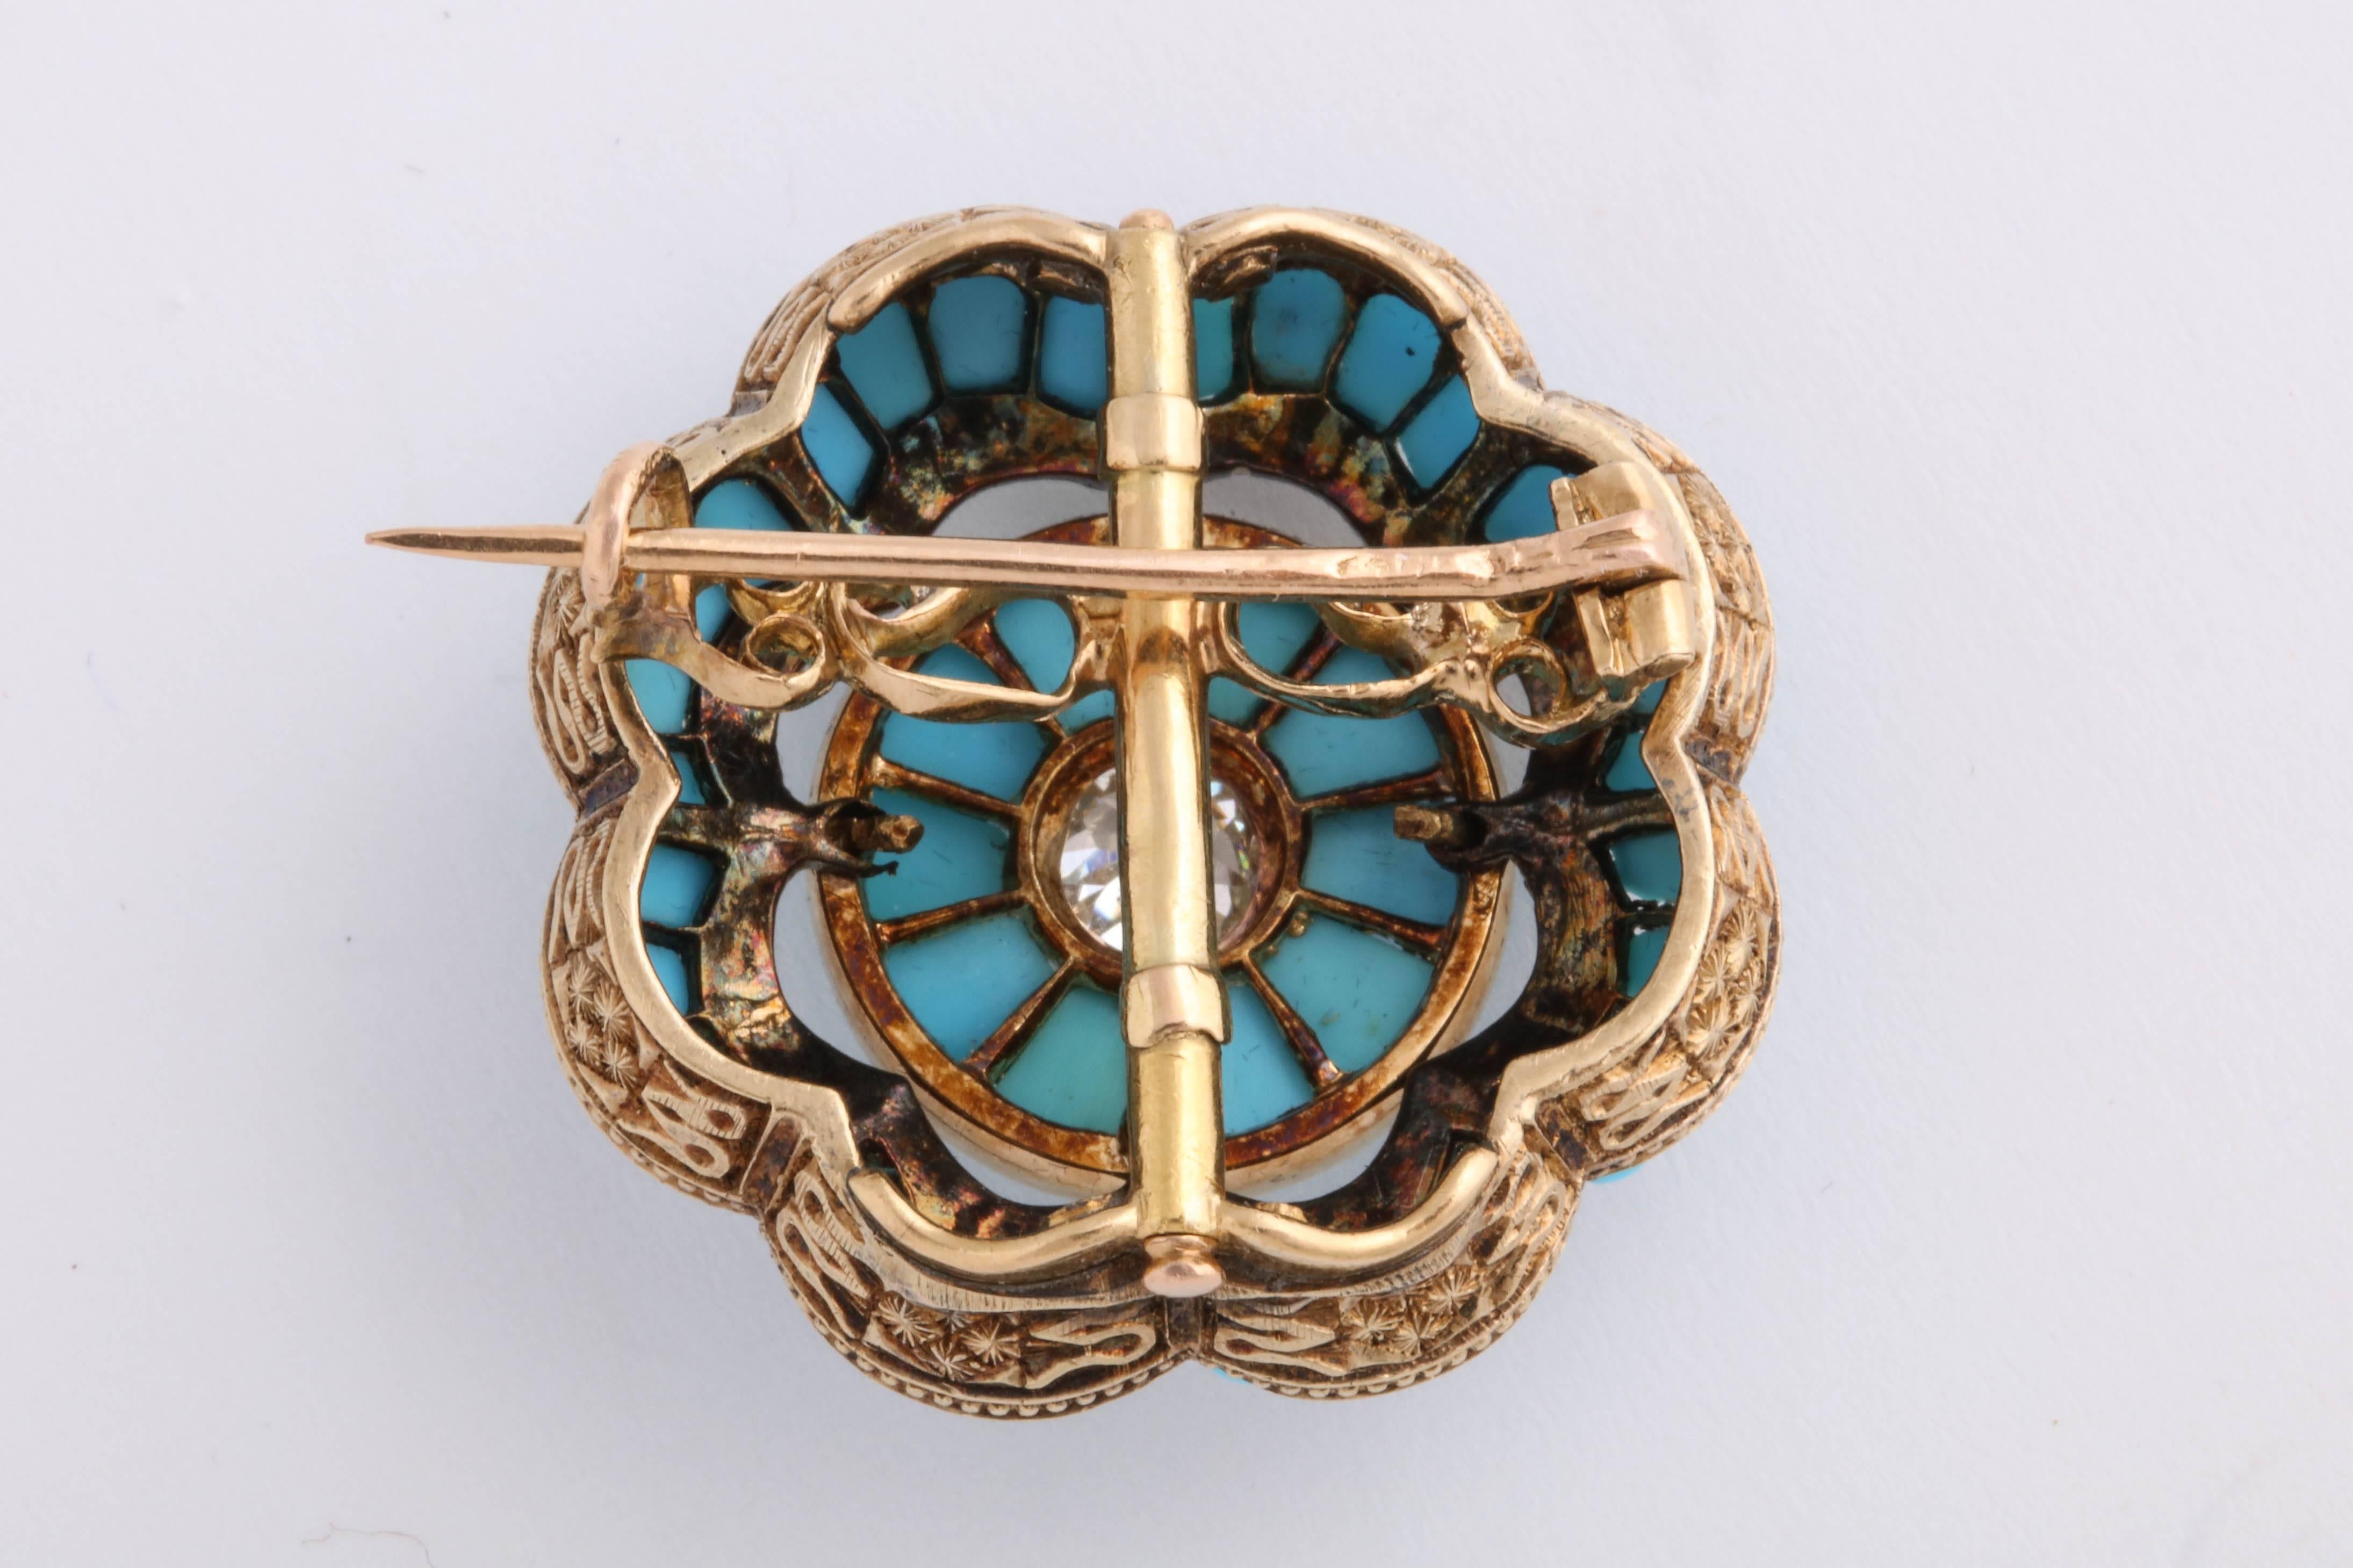 Turquoise and Diamond Brooch set in 18K yellow gold. Center old mine cut diamond is just under .50cts. Beautiful engraving in the scalloped design of the gold. 